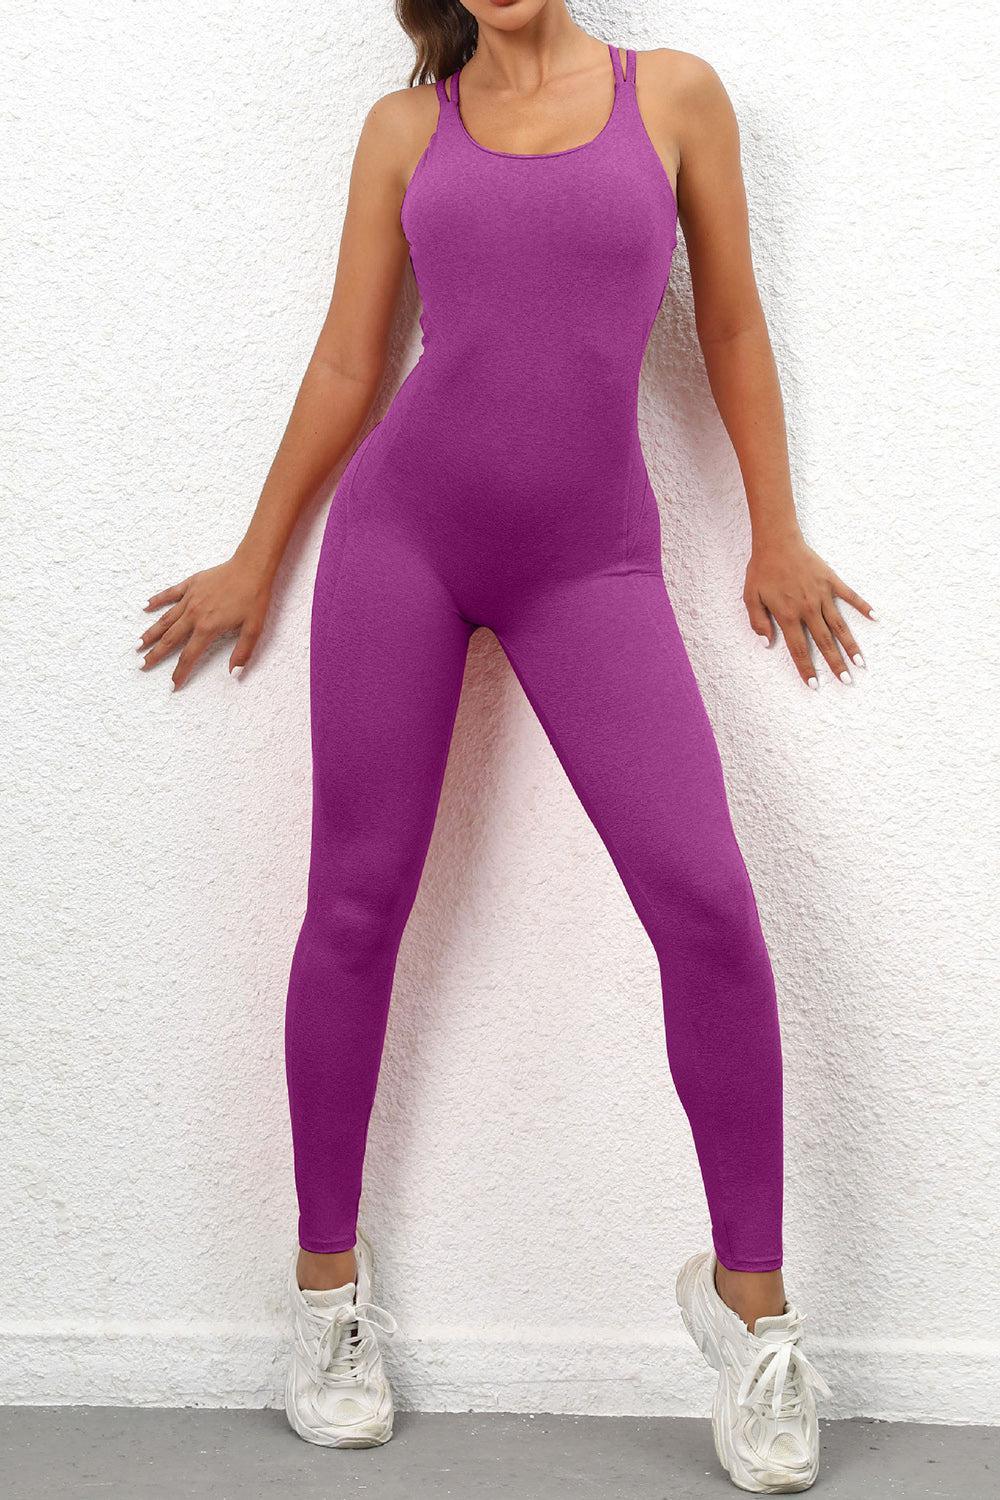 a woman in a purple bodysuit leaning against a wall